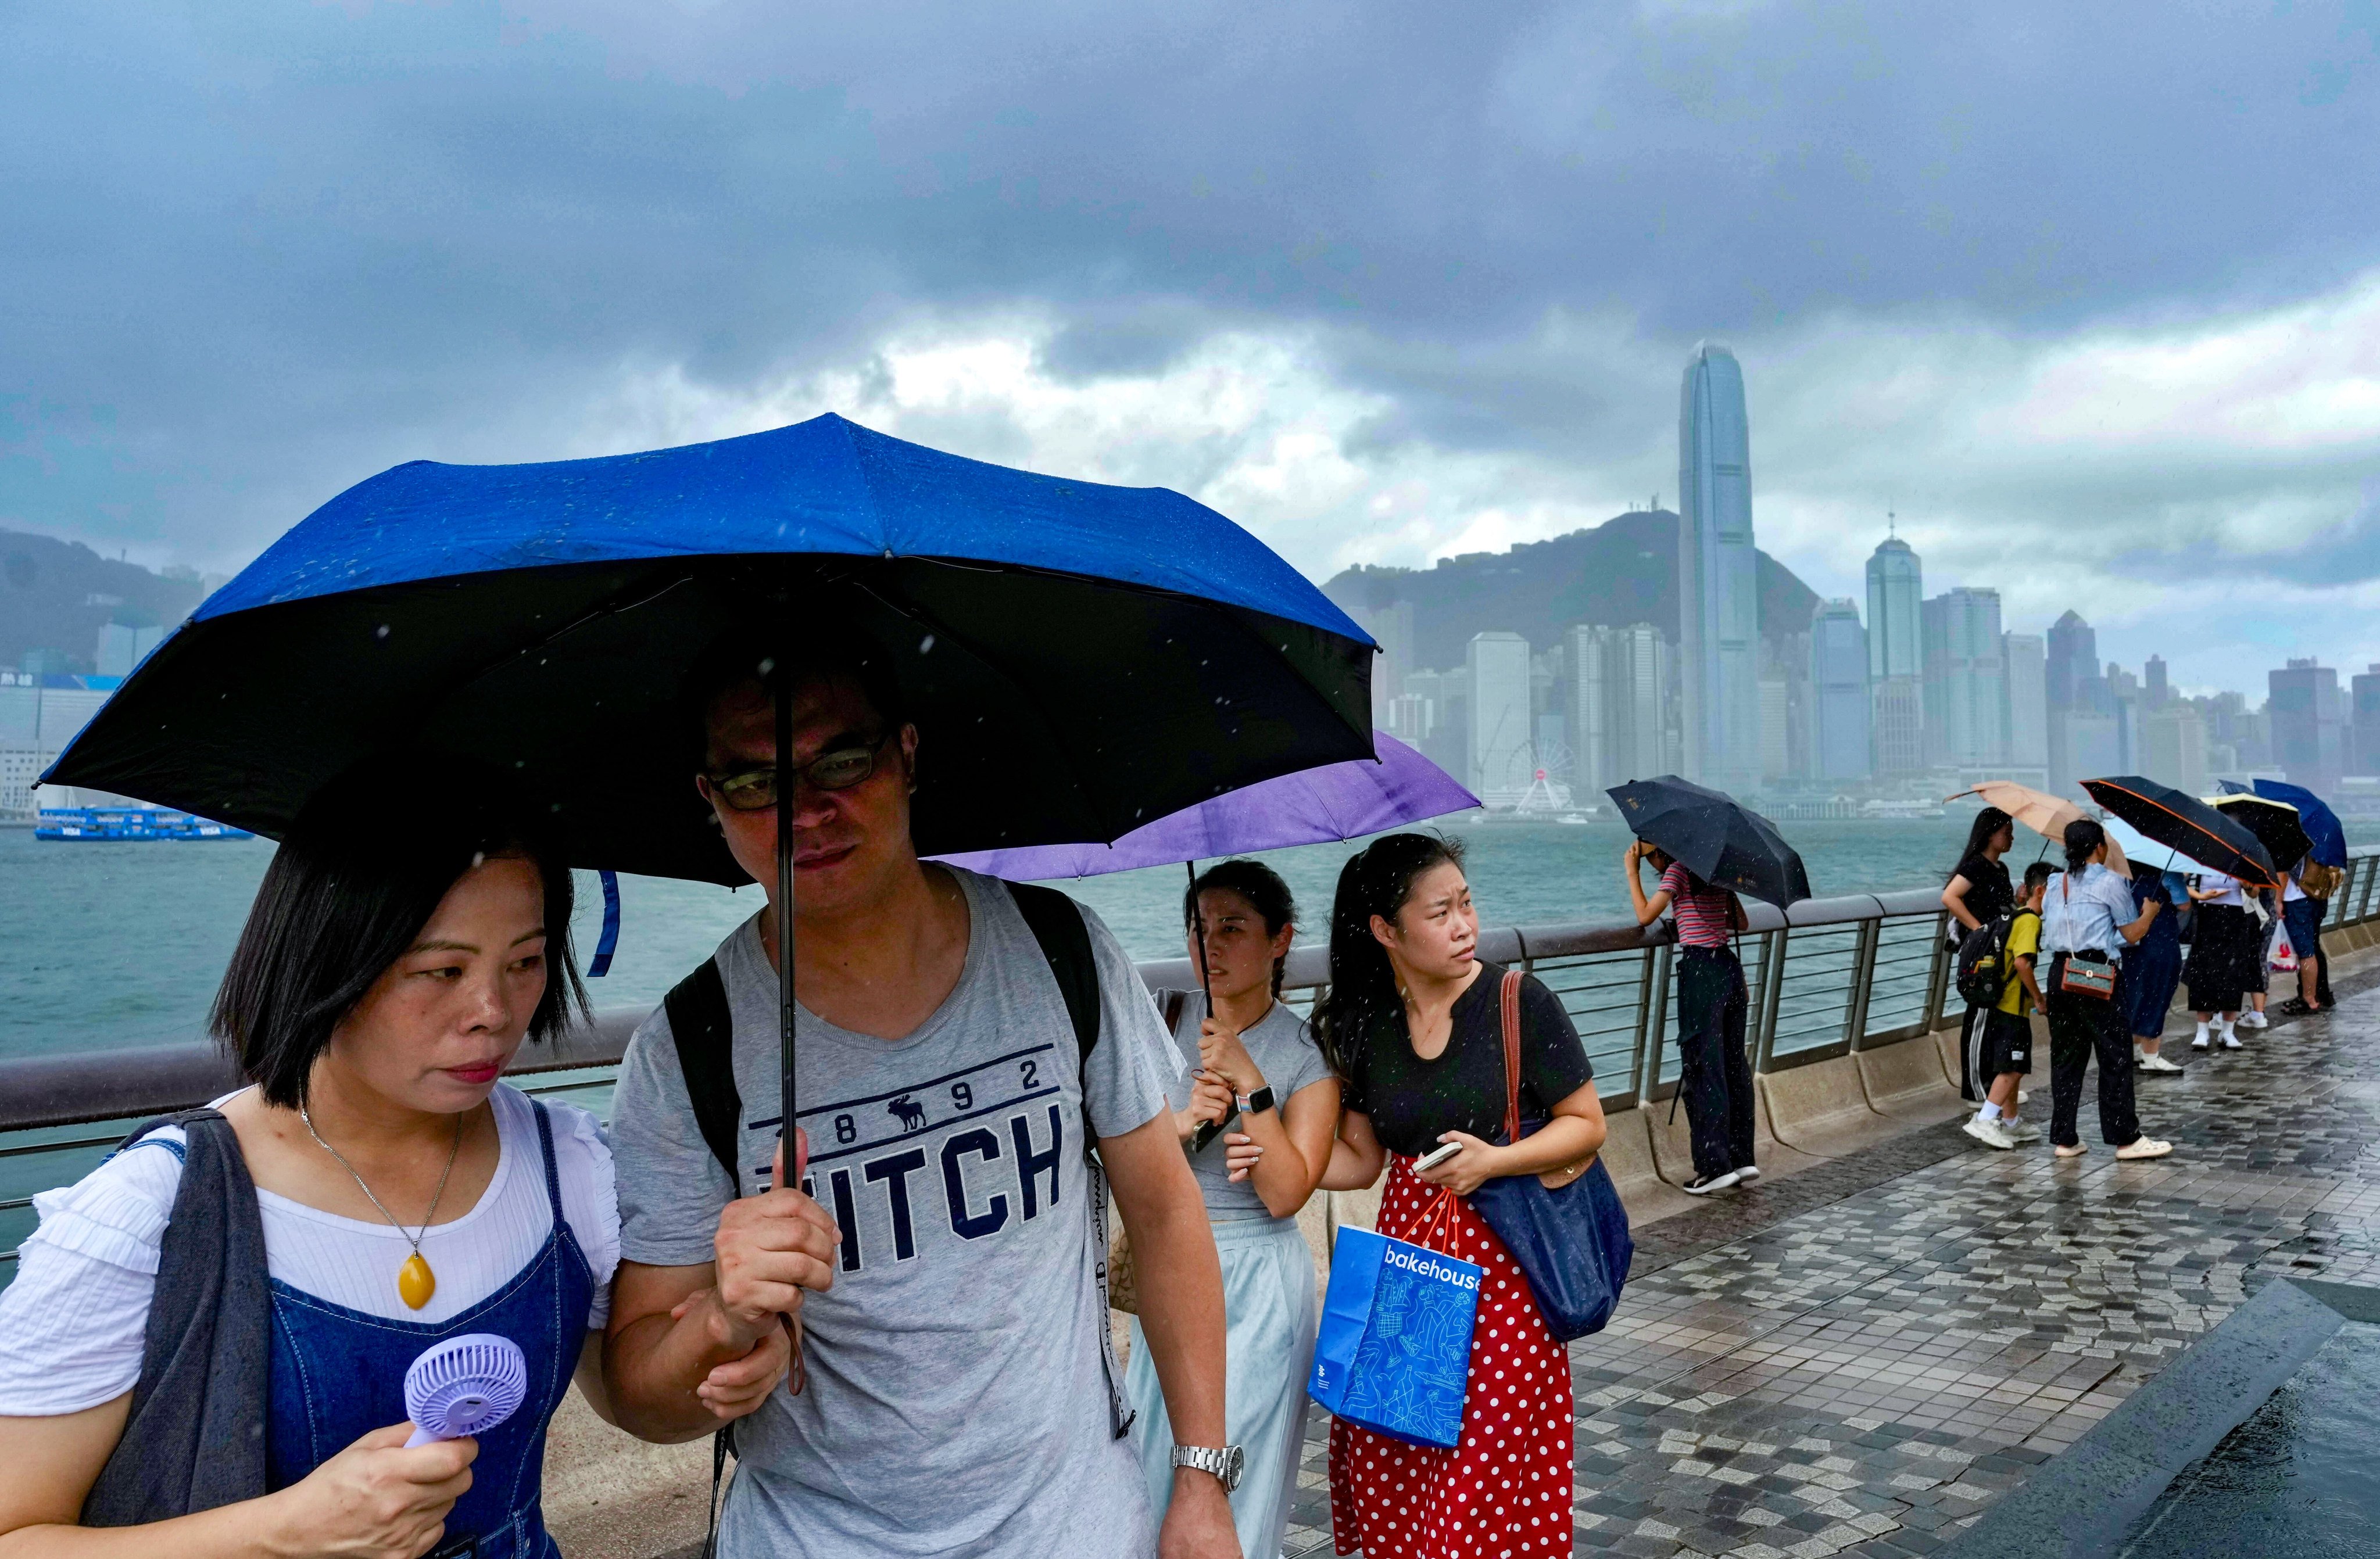 Maximum temperatures in Hong Kong will drop slightly to about 30 or 31 degrees Celsius during rainy days. Photo: Sam Tsang